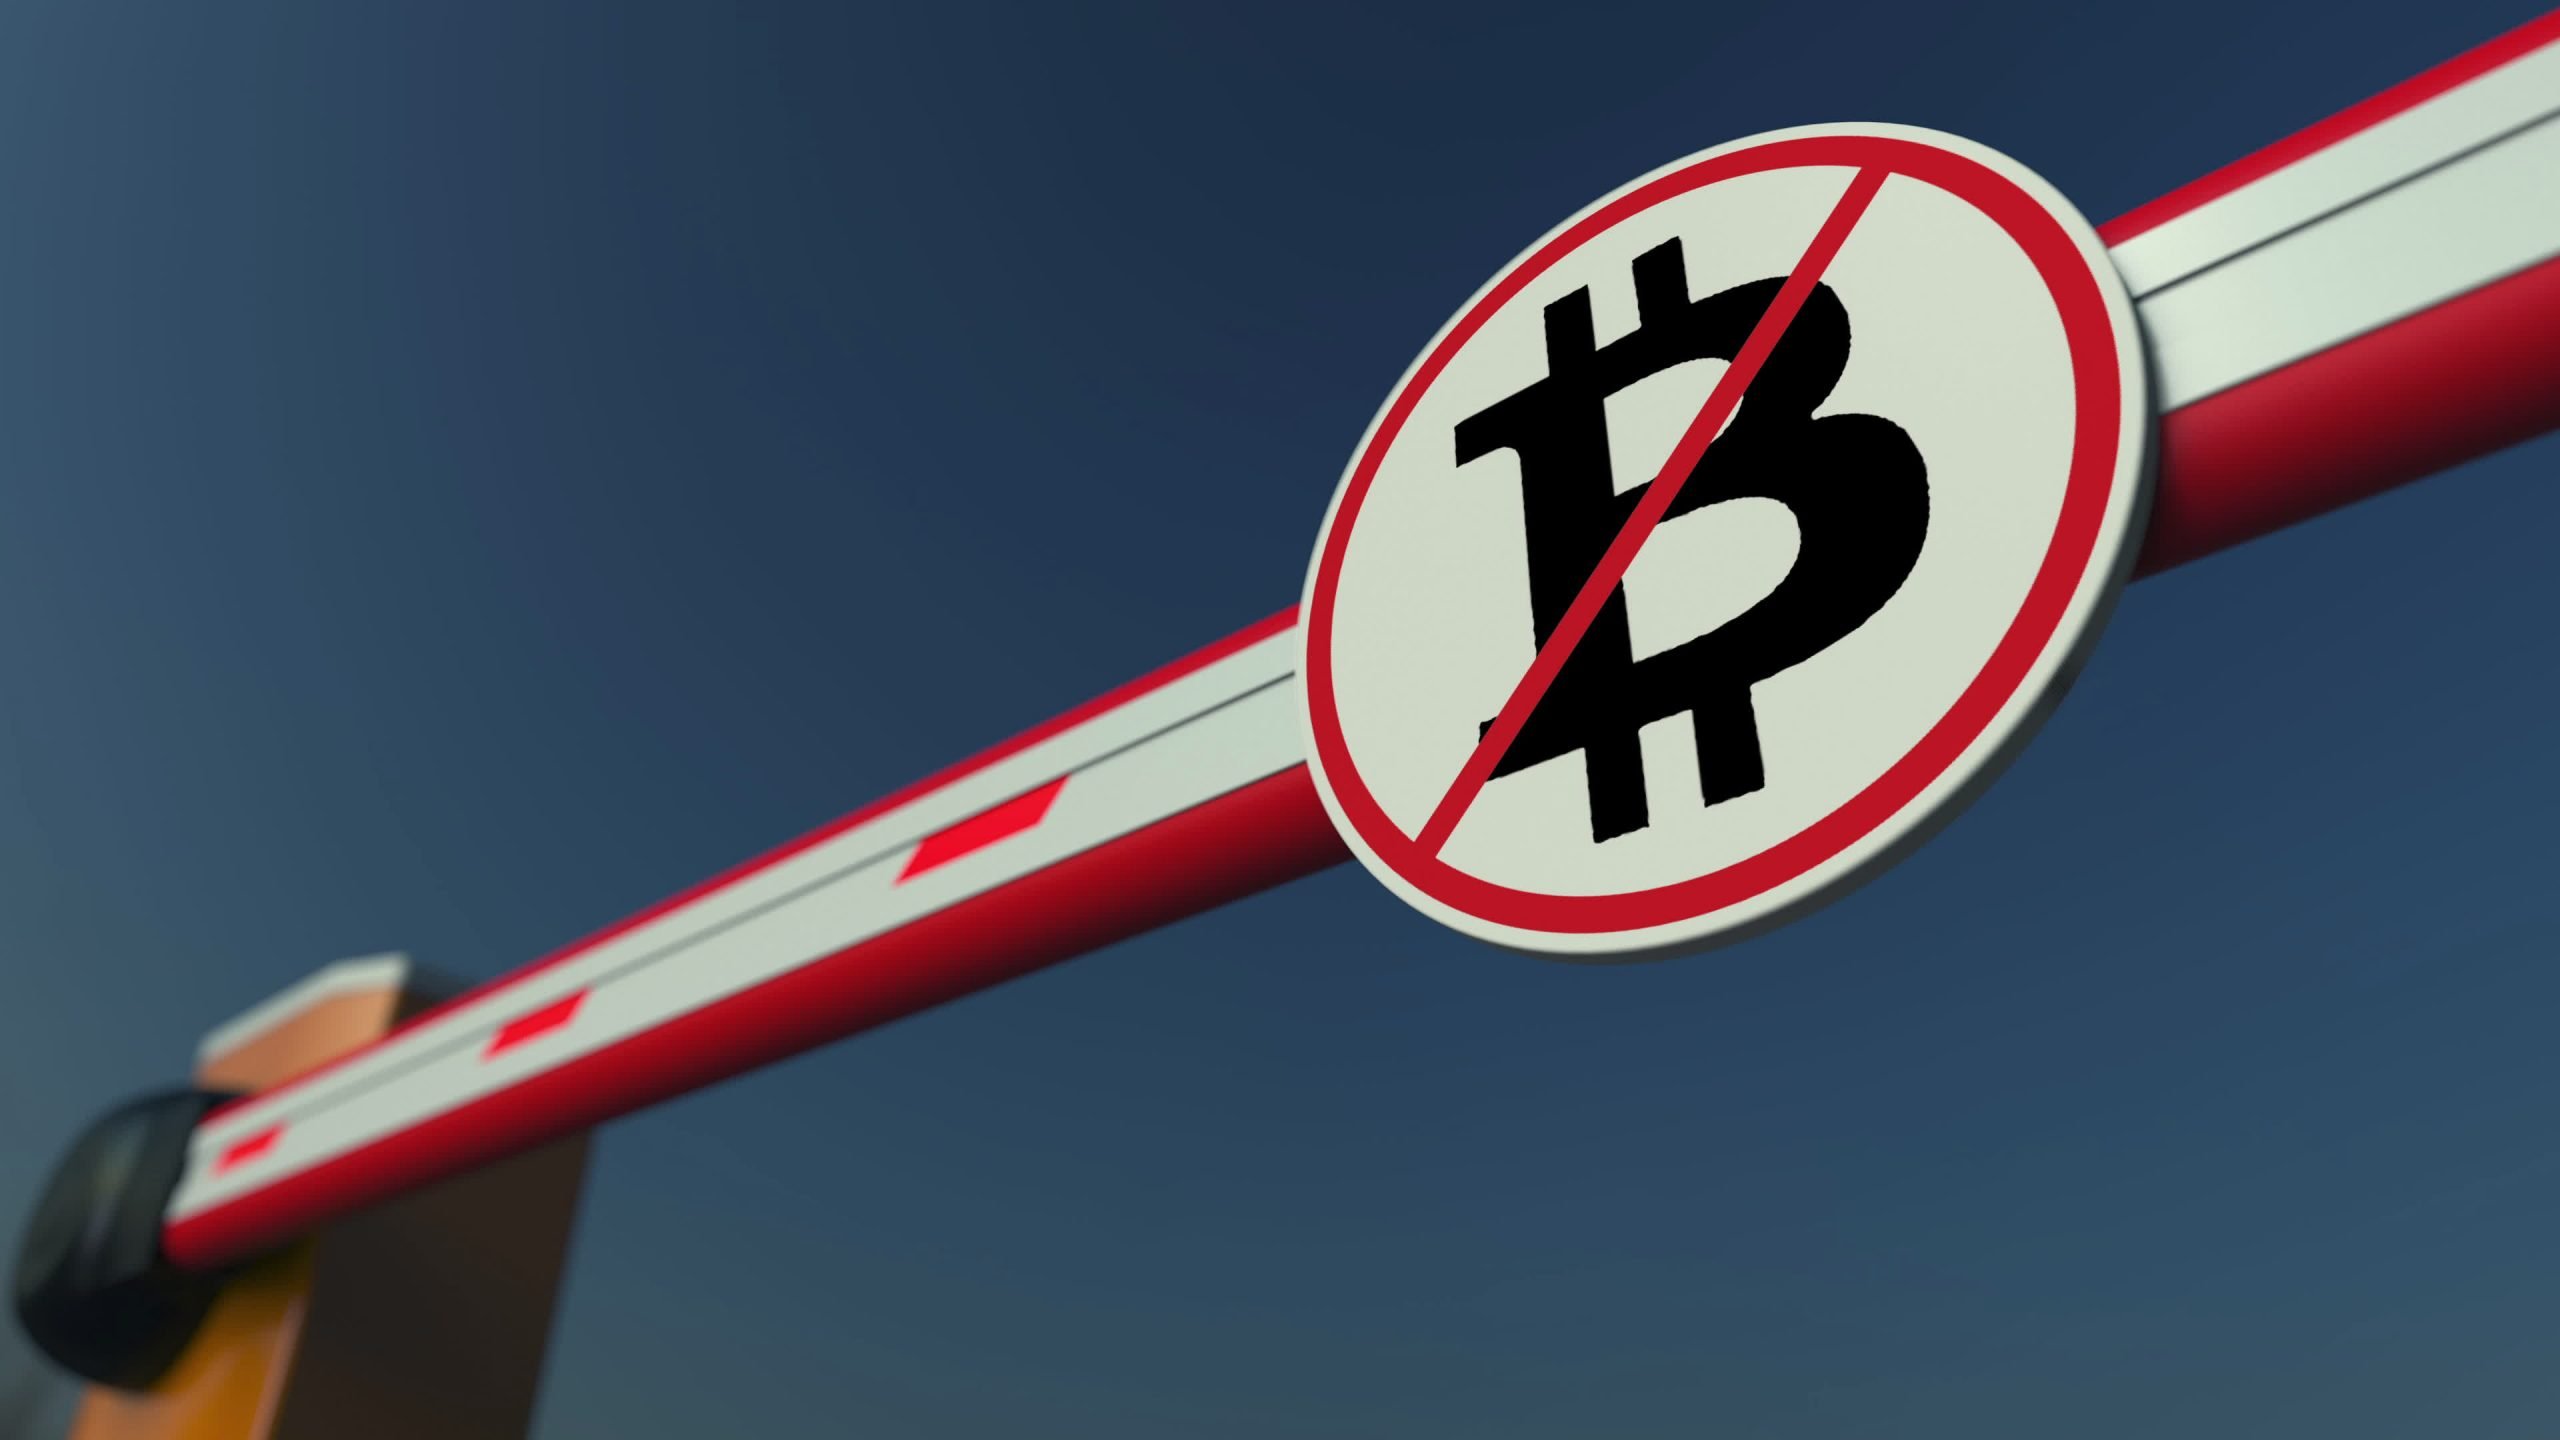 Kuwait announced an absolute ban on crypto activities  4